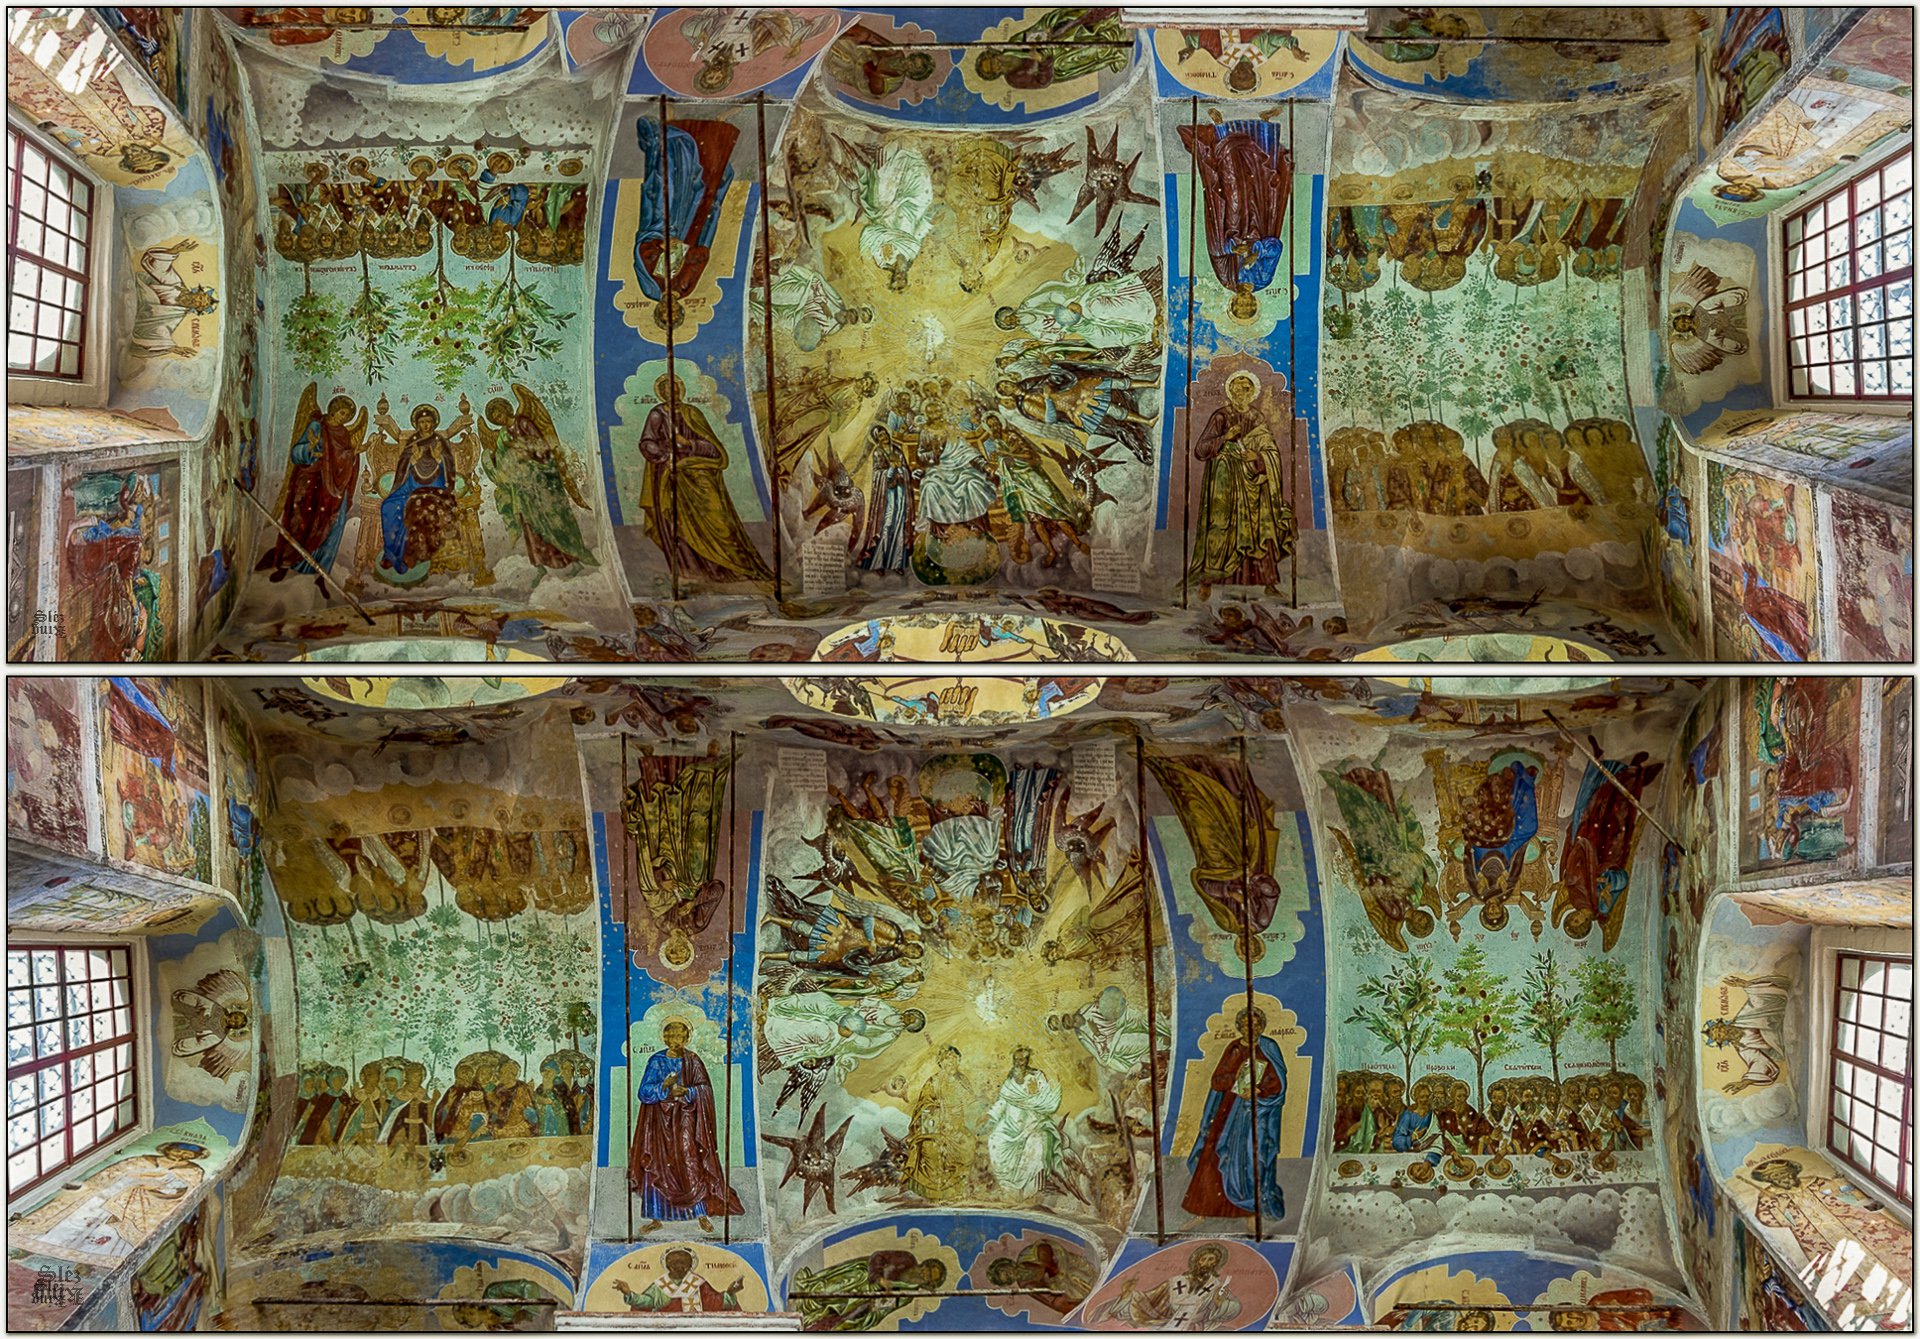 The frescoes of the Trinity Cathedral of the Alexandro-Svirsky monastery